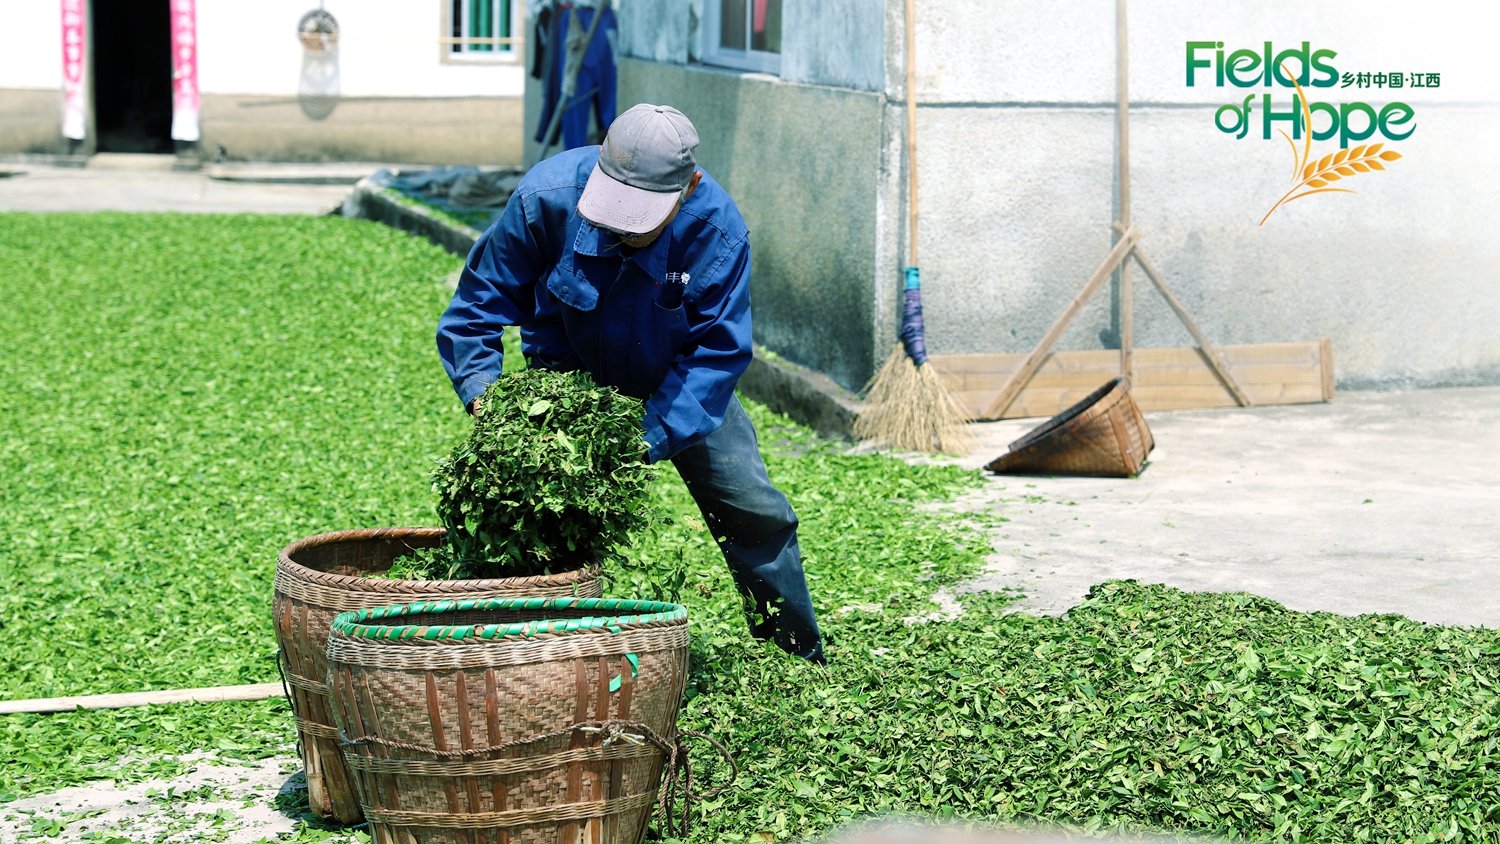 The solar term Guyu signals the end of spring. At this time of year, local tea farmers are busy harvesting the leaves before placing them outside to bask and dry in the warm sunshine. /CGTN